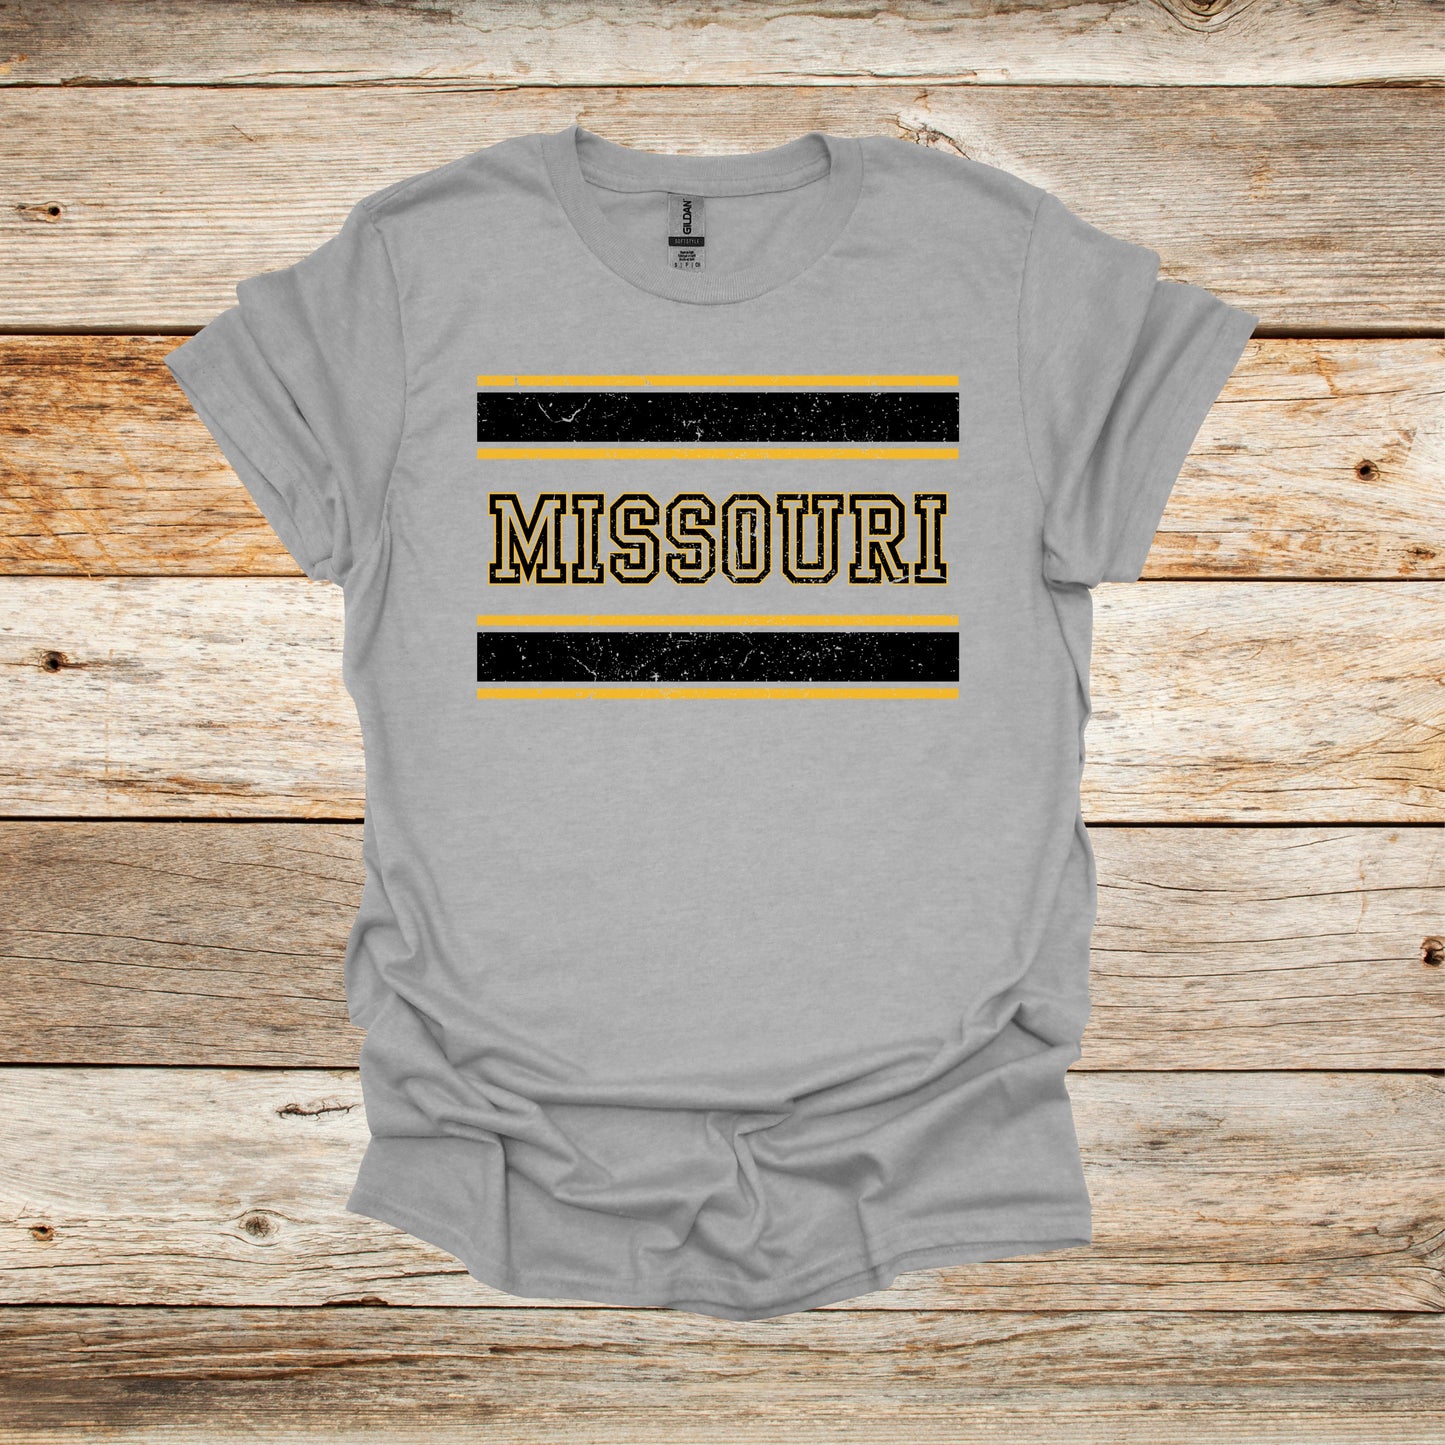 College T Shirt - Missouri Tigers - Adult and Children's Tee Shirts T-Shirts Graphic Avenue Sport Grey Adult Small 